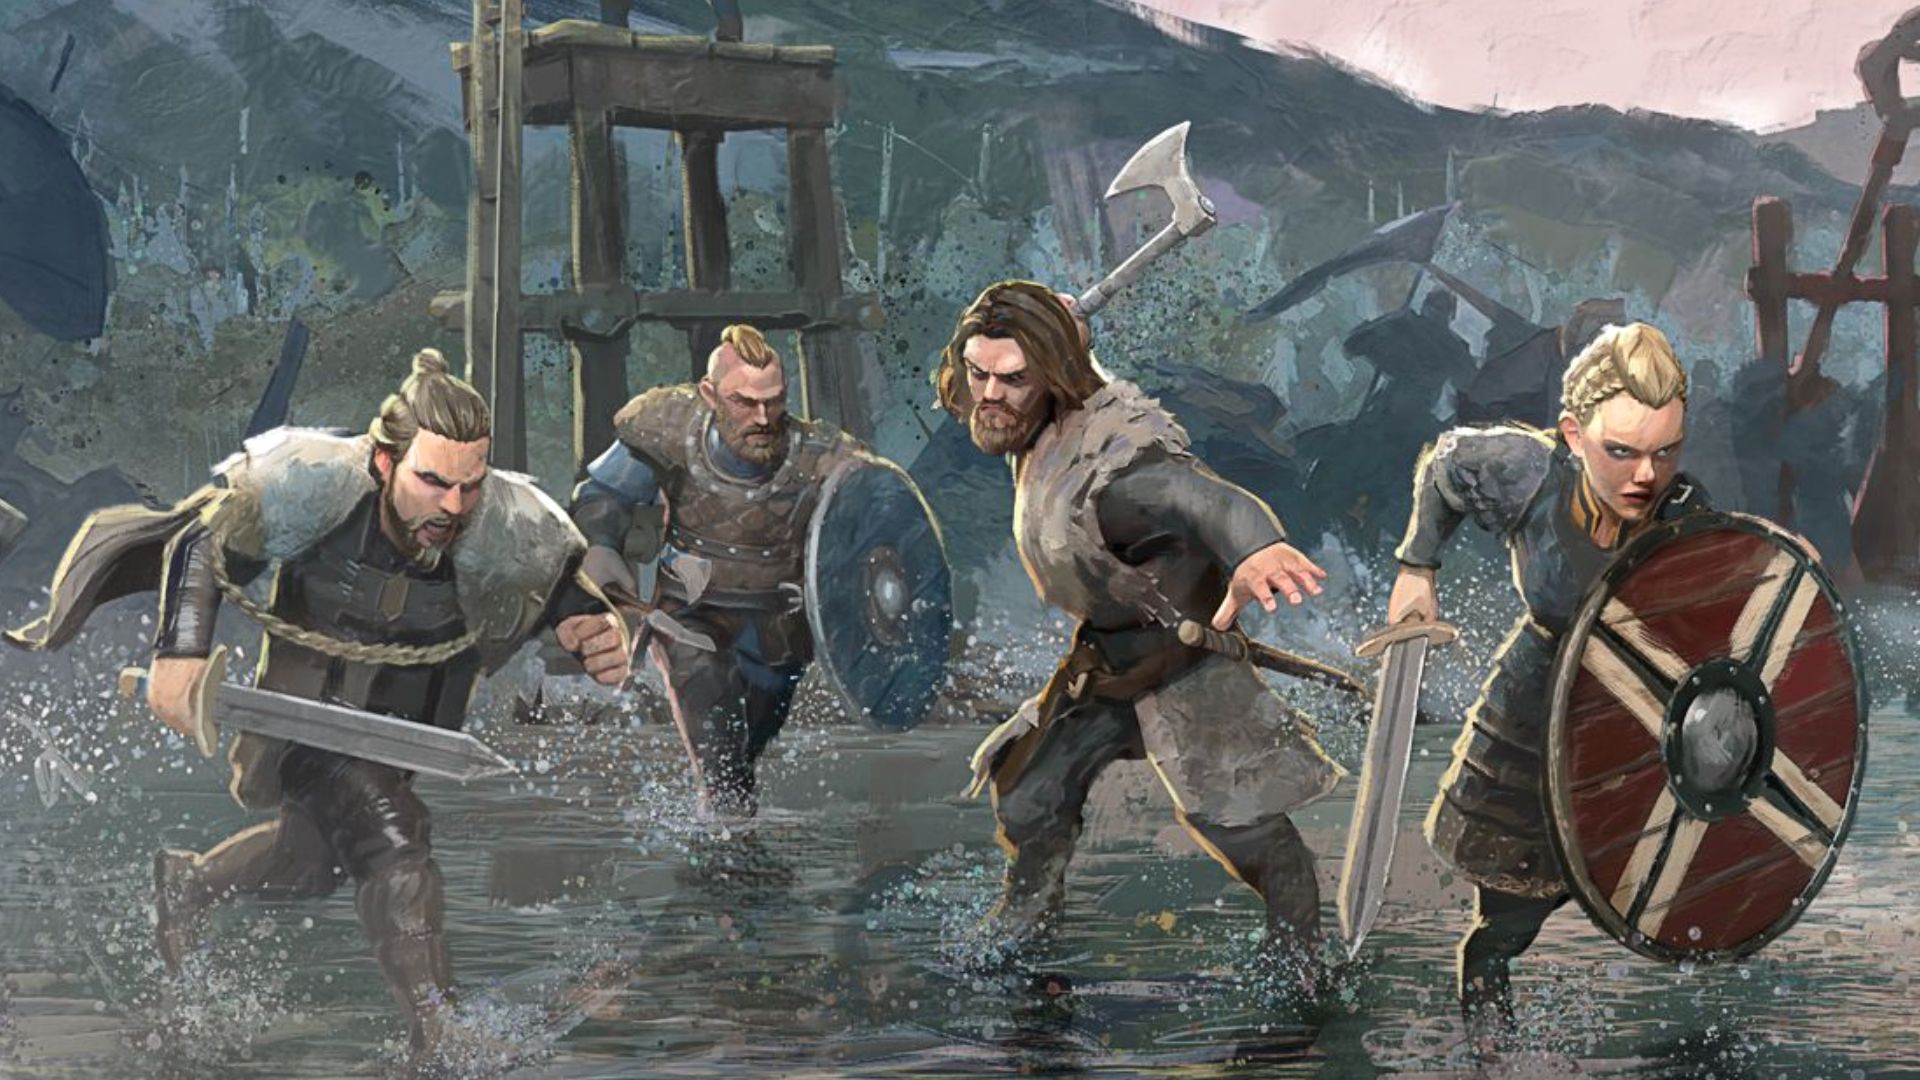 Live like a jarl in the Vikings: Valhalla mobile game on Netflix